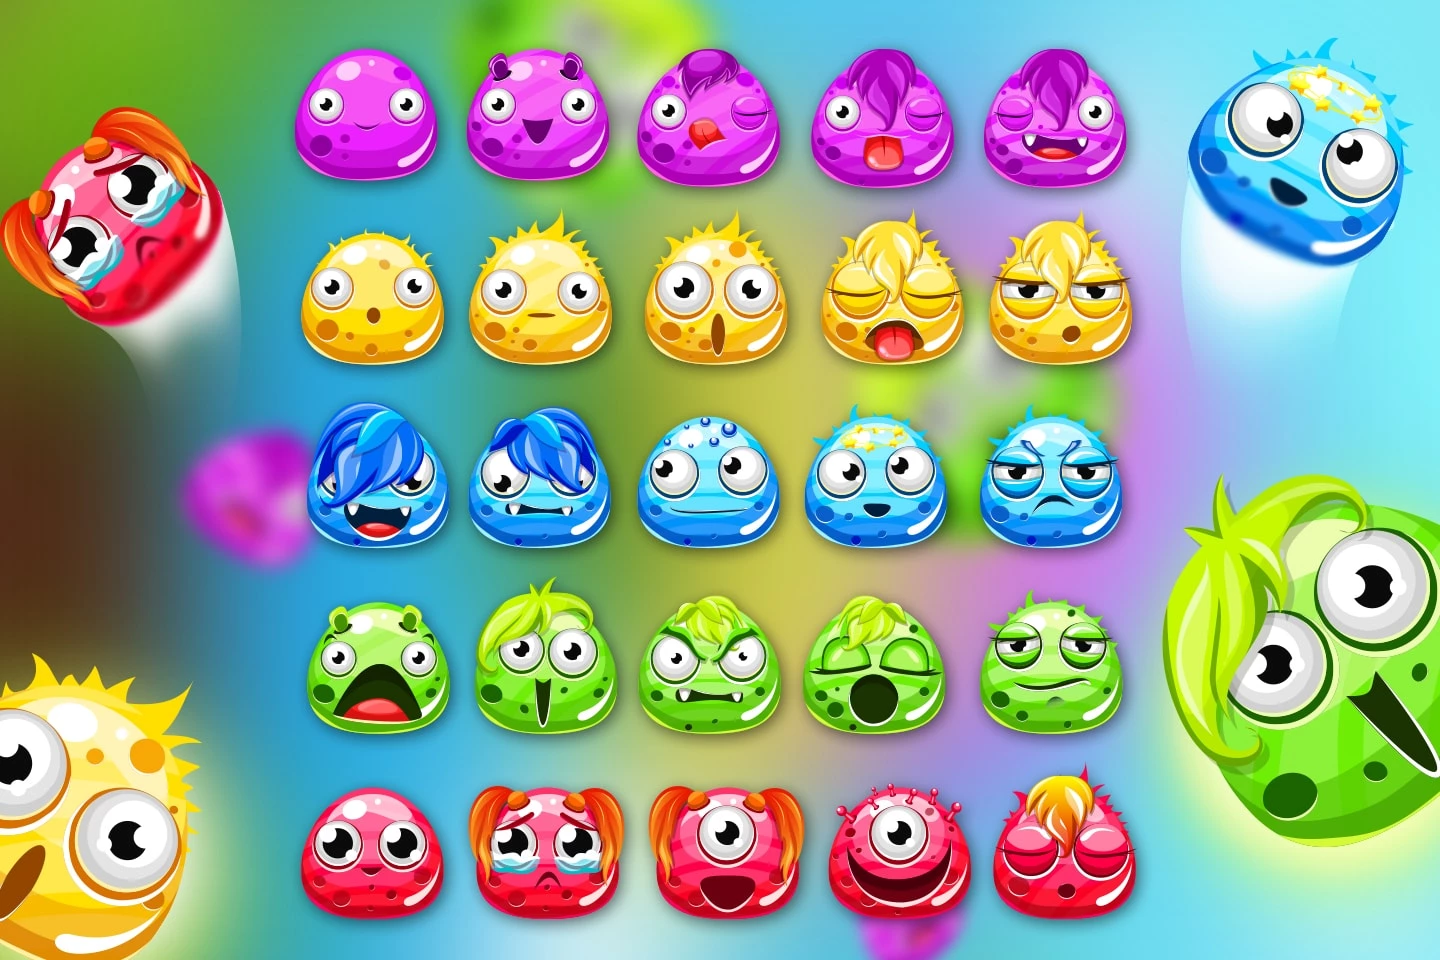 Monster Candy Crush Online – Play Free in Browser 